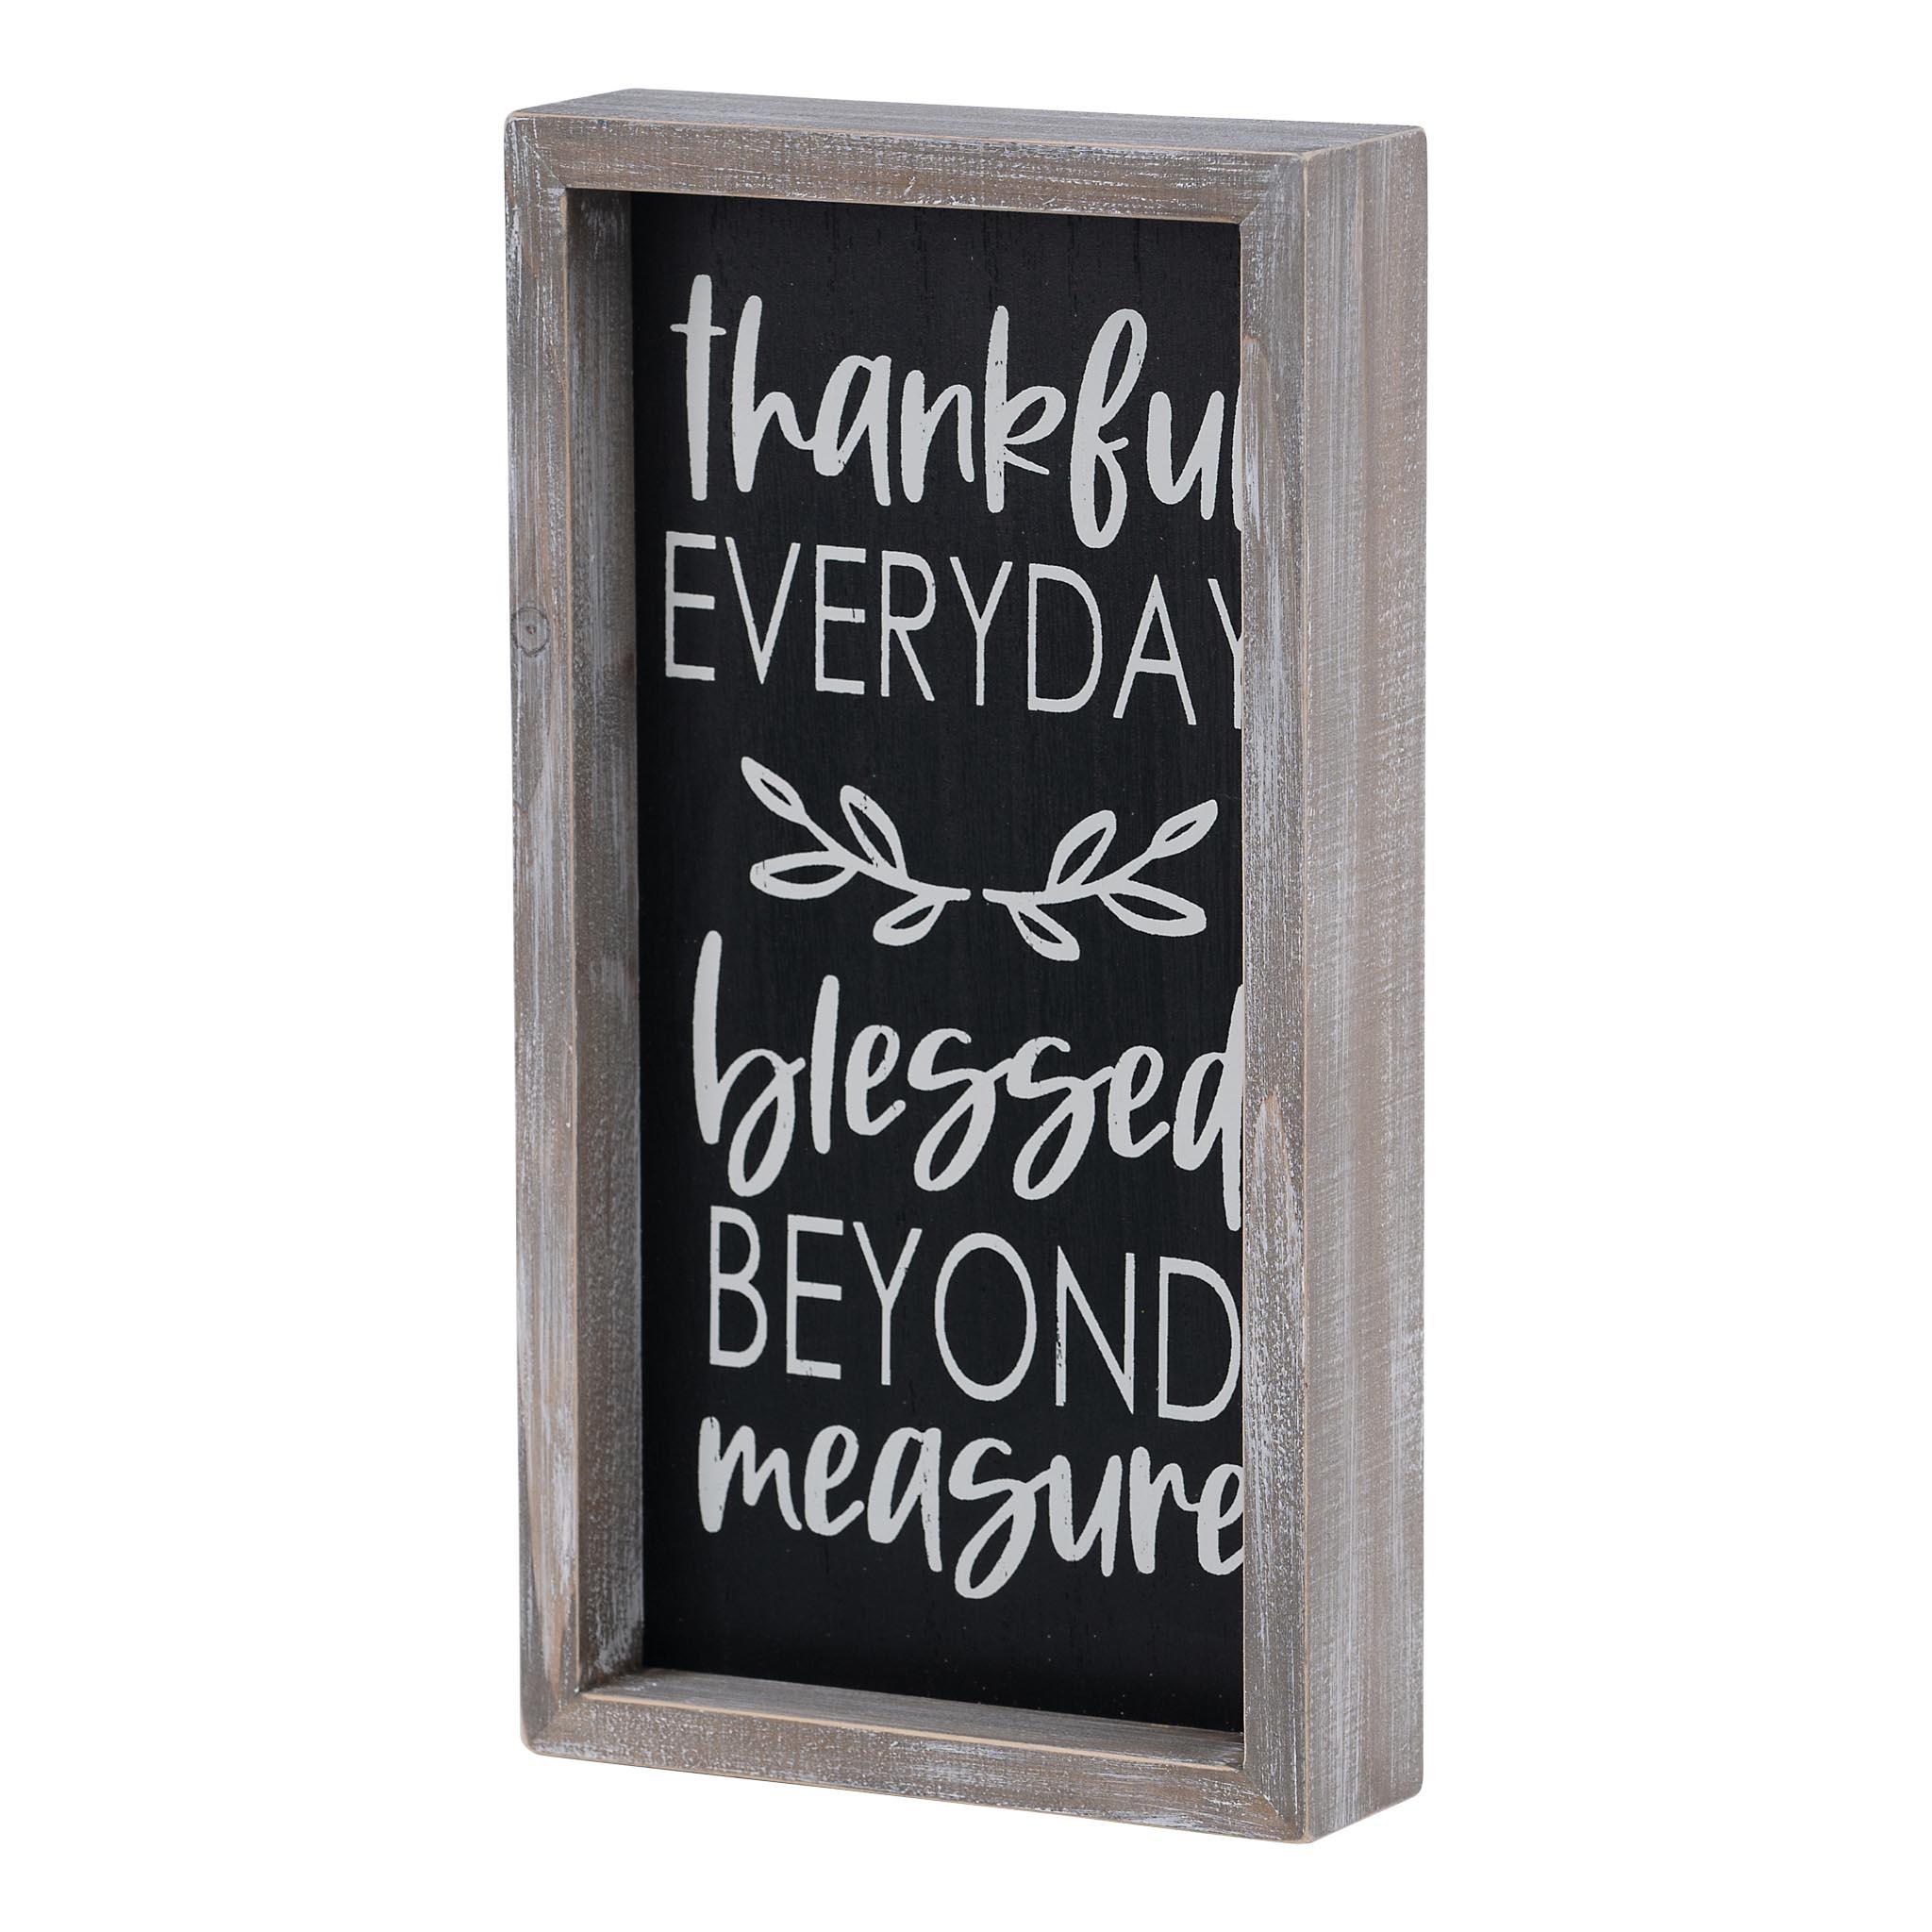 Check Out Our Thankful Everyday HAUS Board GLORY Measure - Beyond Framed – Blessed